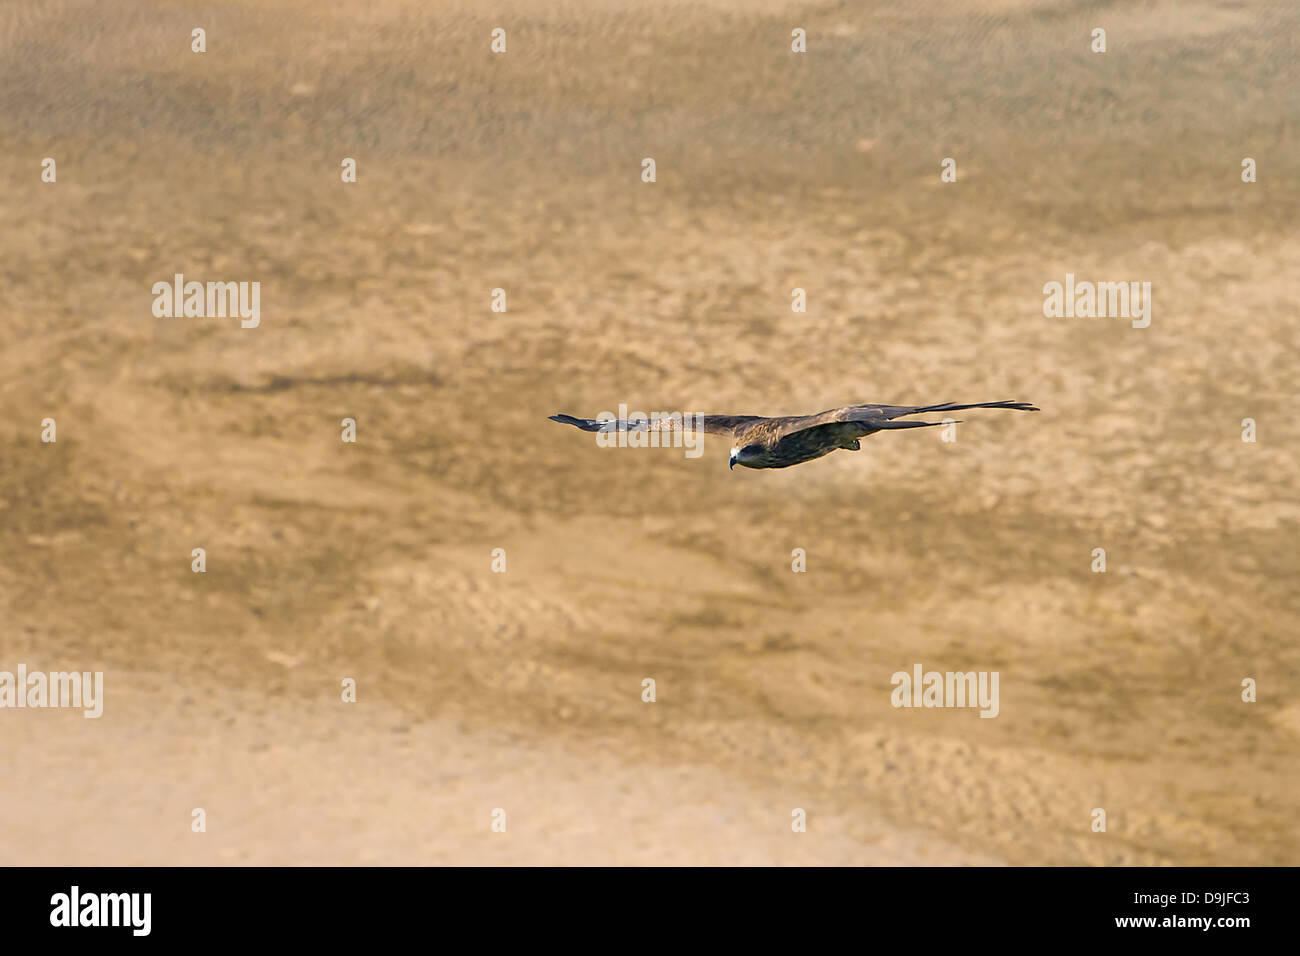 An eagle flying over the ground. Top view Stock Photo